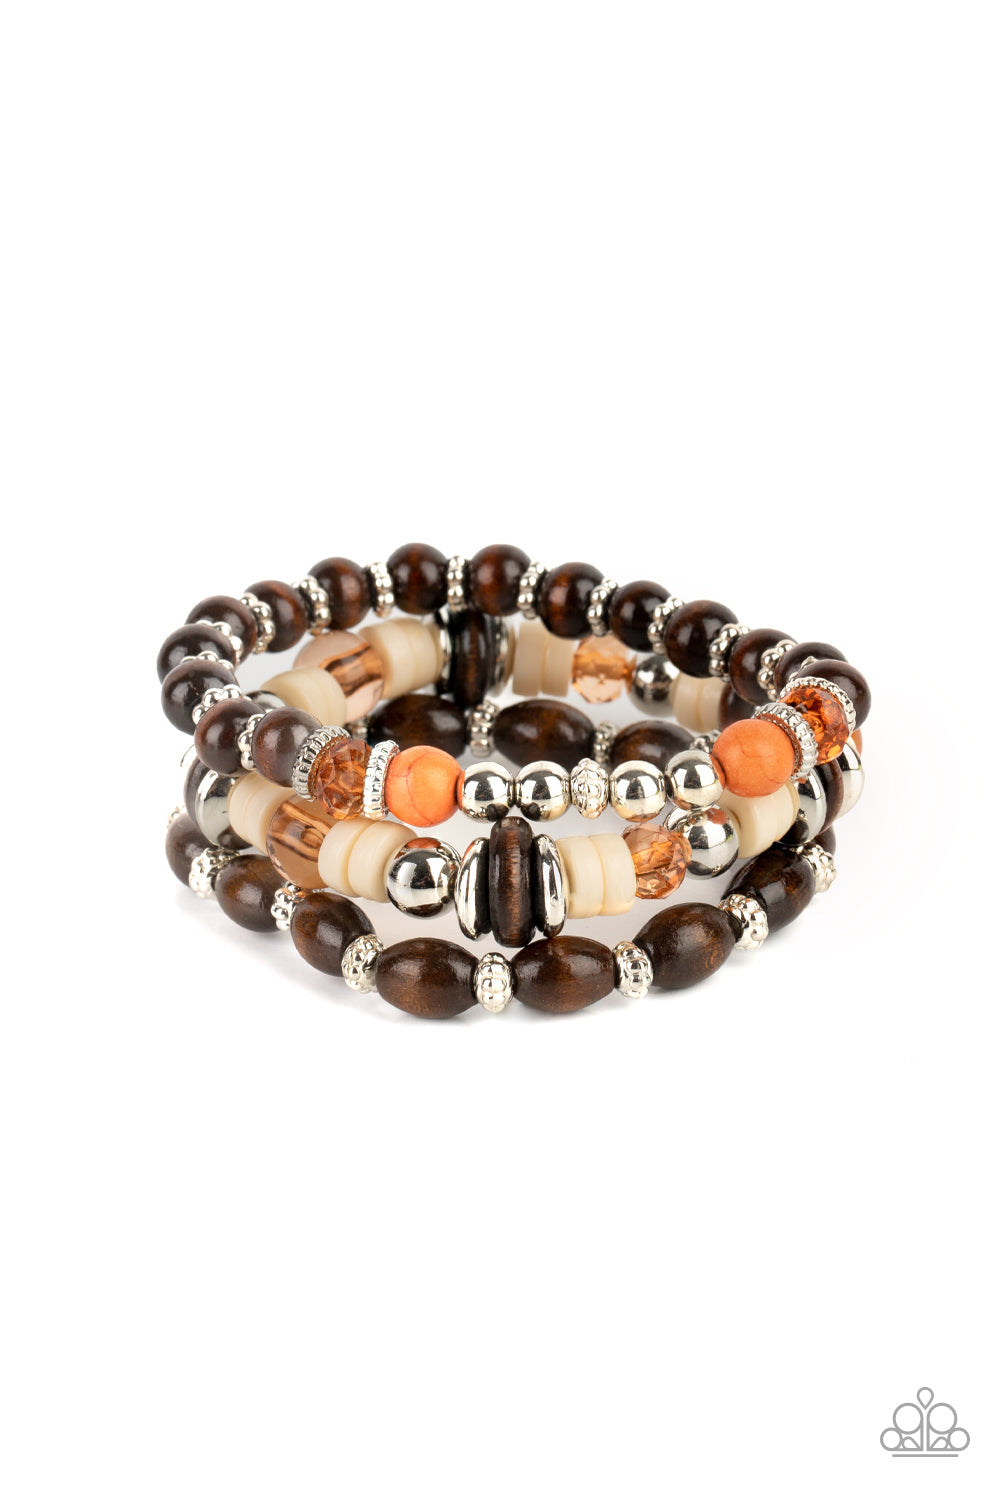 Belongs In The Wild - Multi Brown Wooden Beads, Silver Accents, Orange Stones Paparazzi Stretch Bracelets